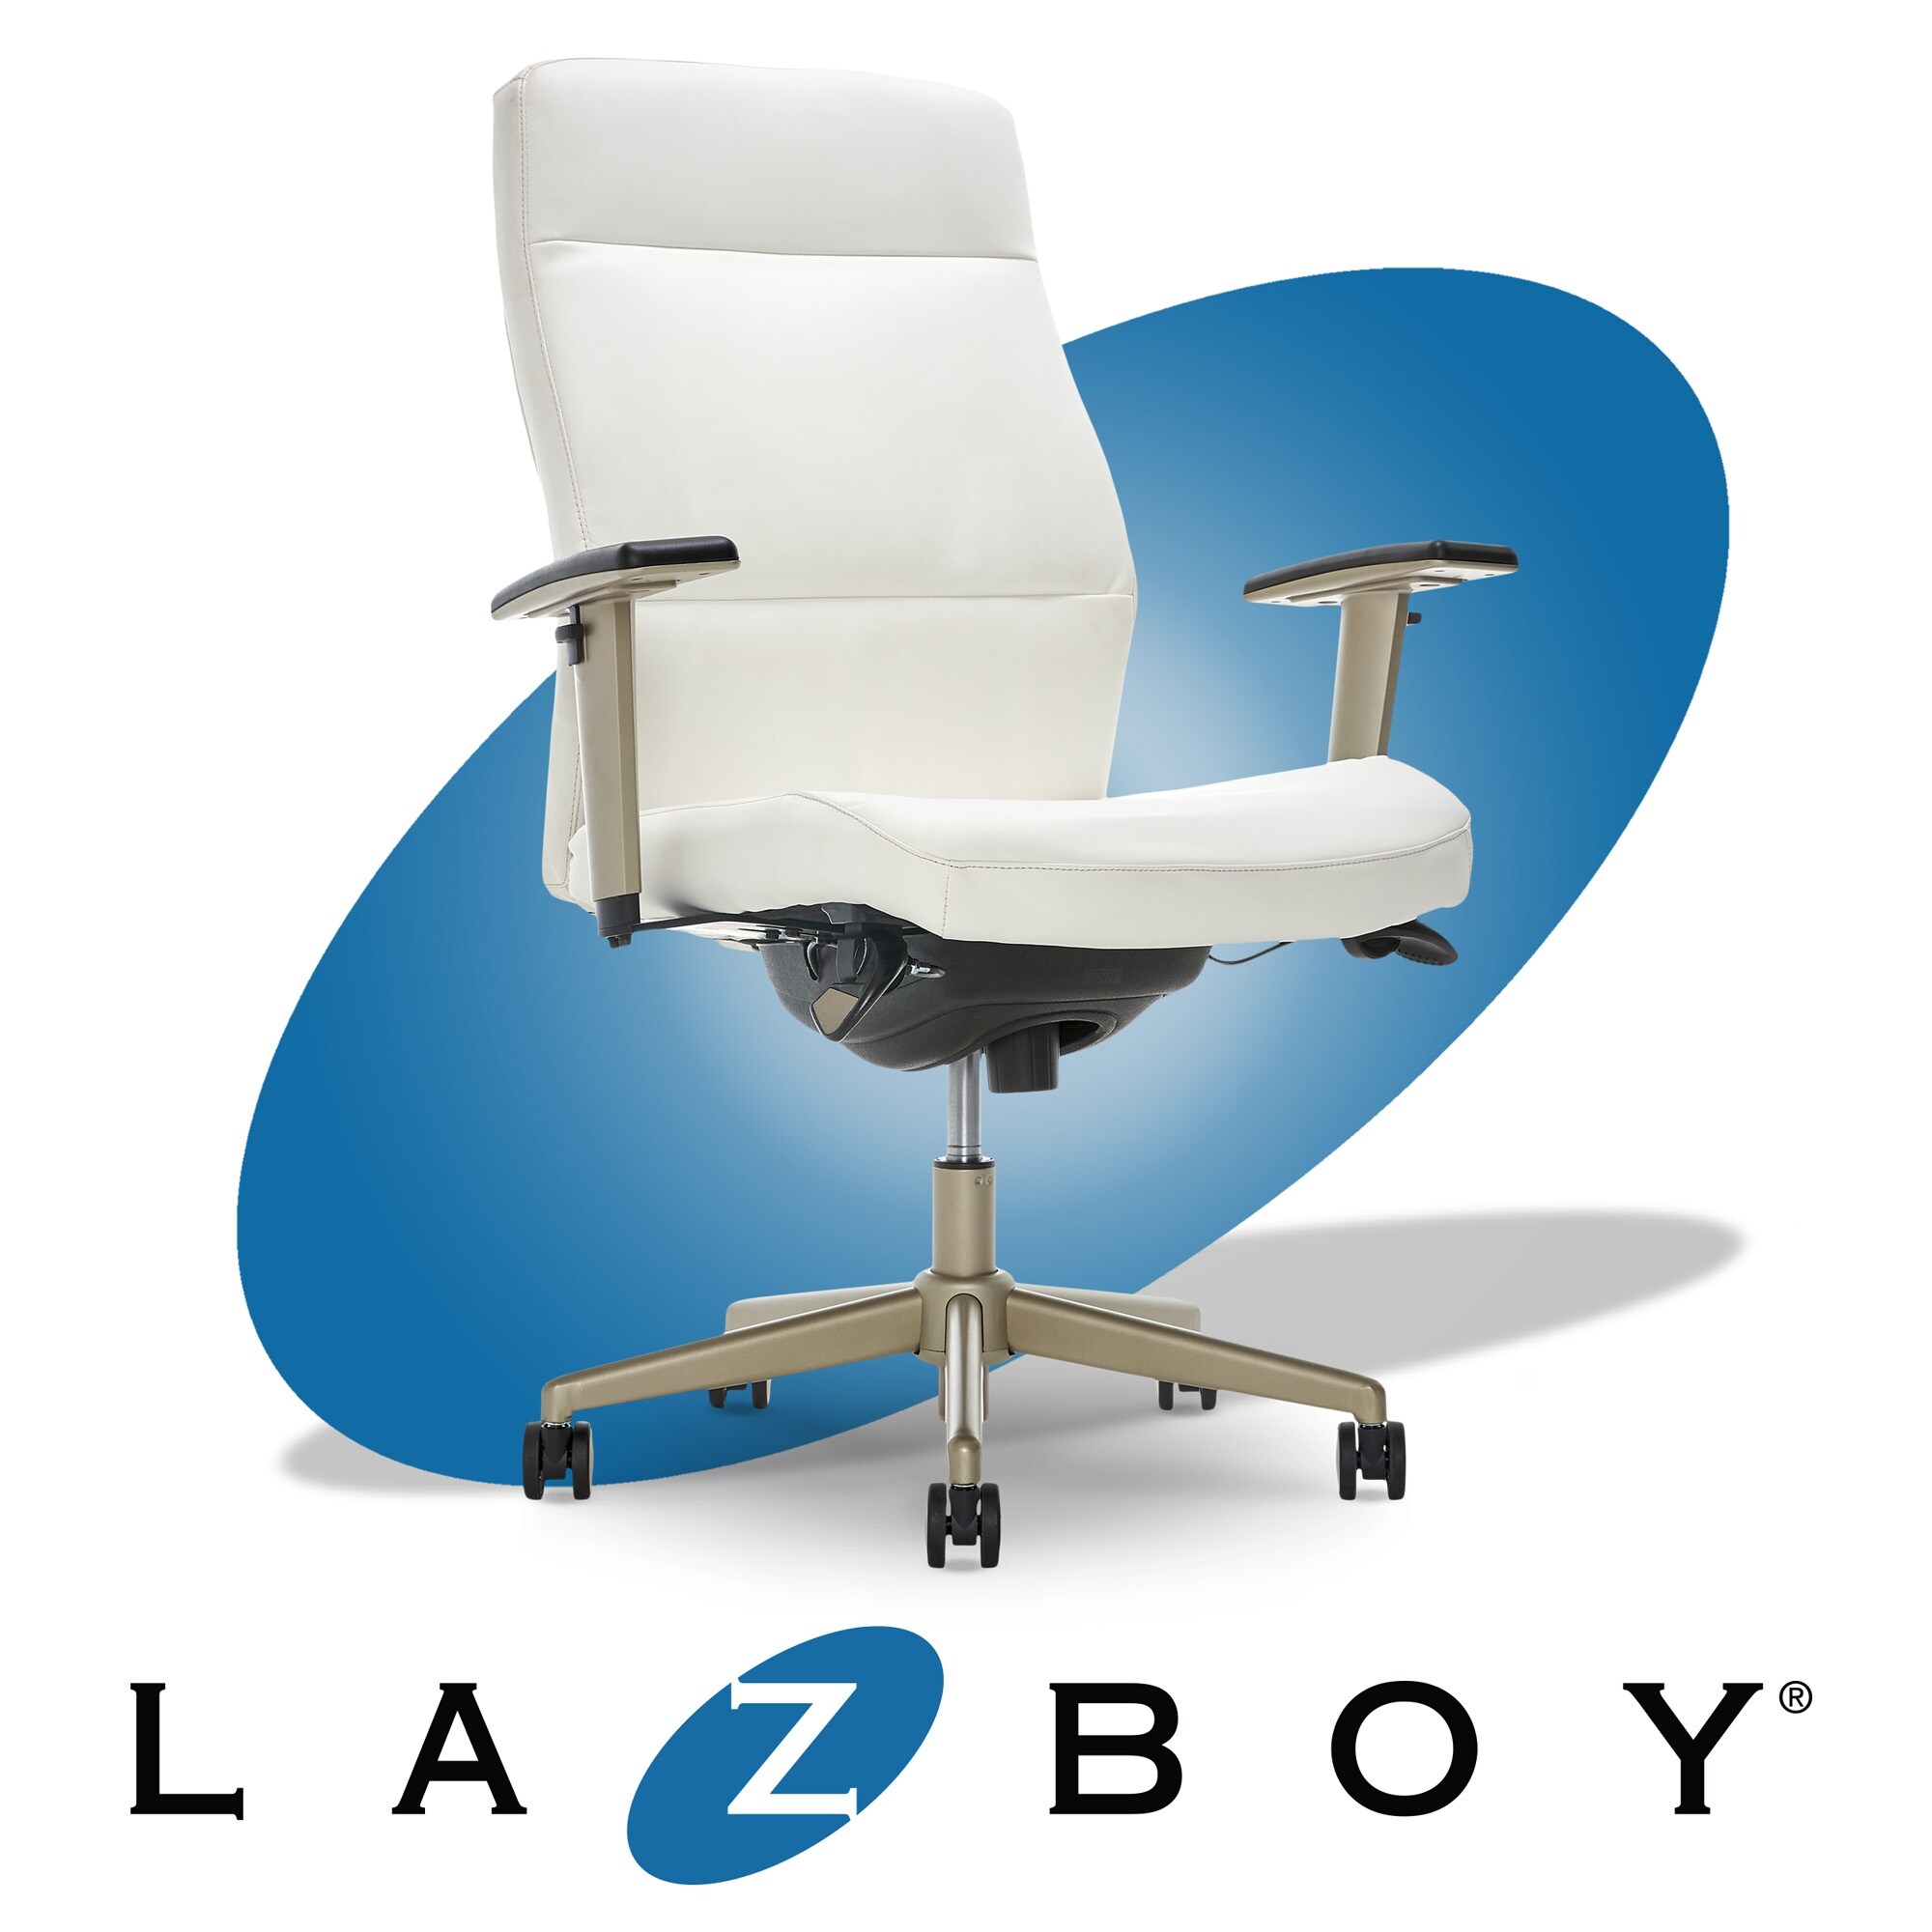 https://ak1.ostkcdn.com/images/products/is/images/direct/dca1e236f01e5b25c0fcee5bf18d8c15c700392d/La-Z-Boy-Modern-Baylor-Executive-Office-Chair.jpg